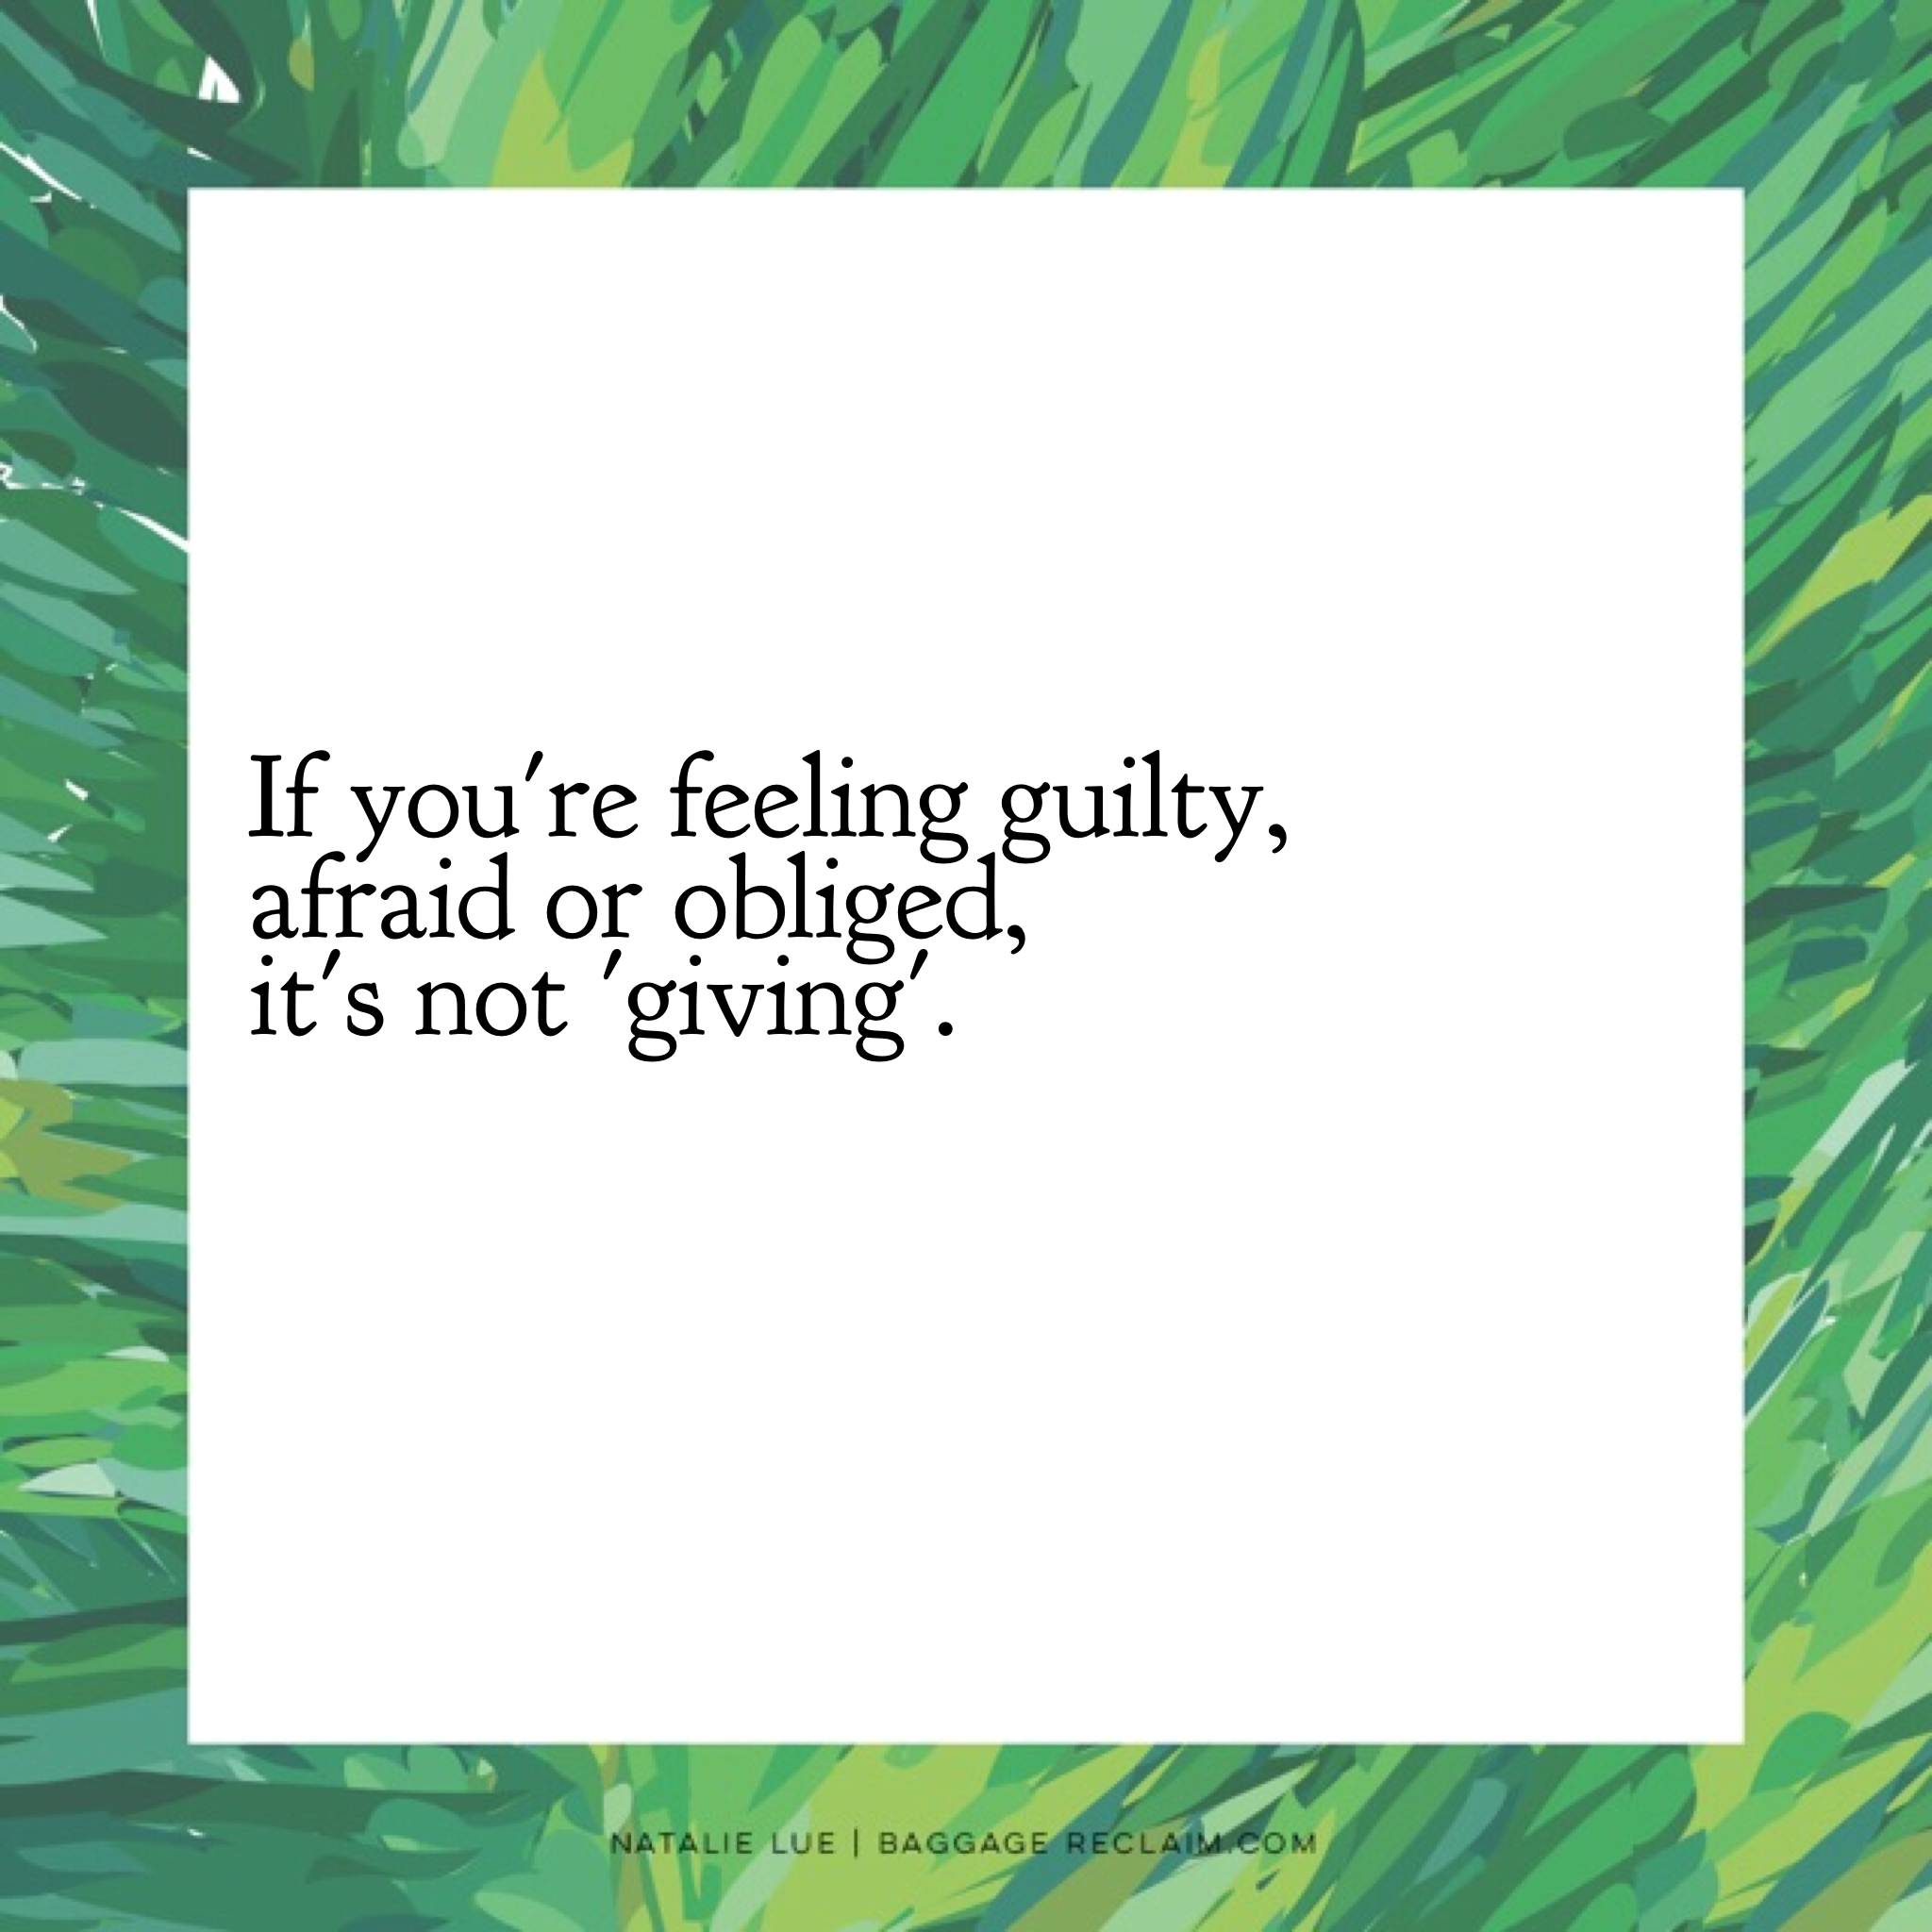 If you're feeling guilty, afraid or obliged, it's not giving.